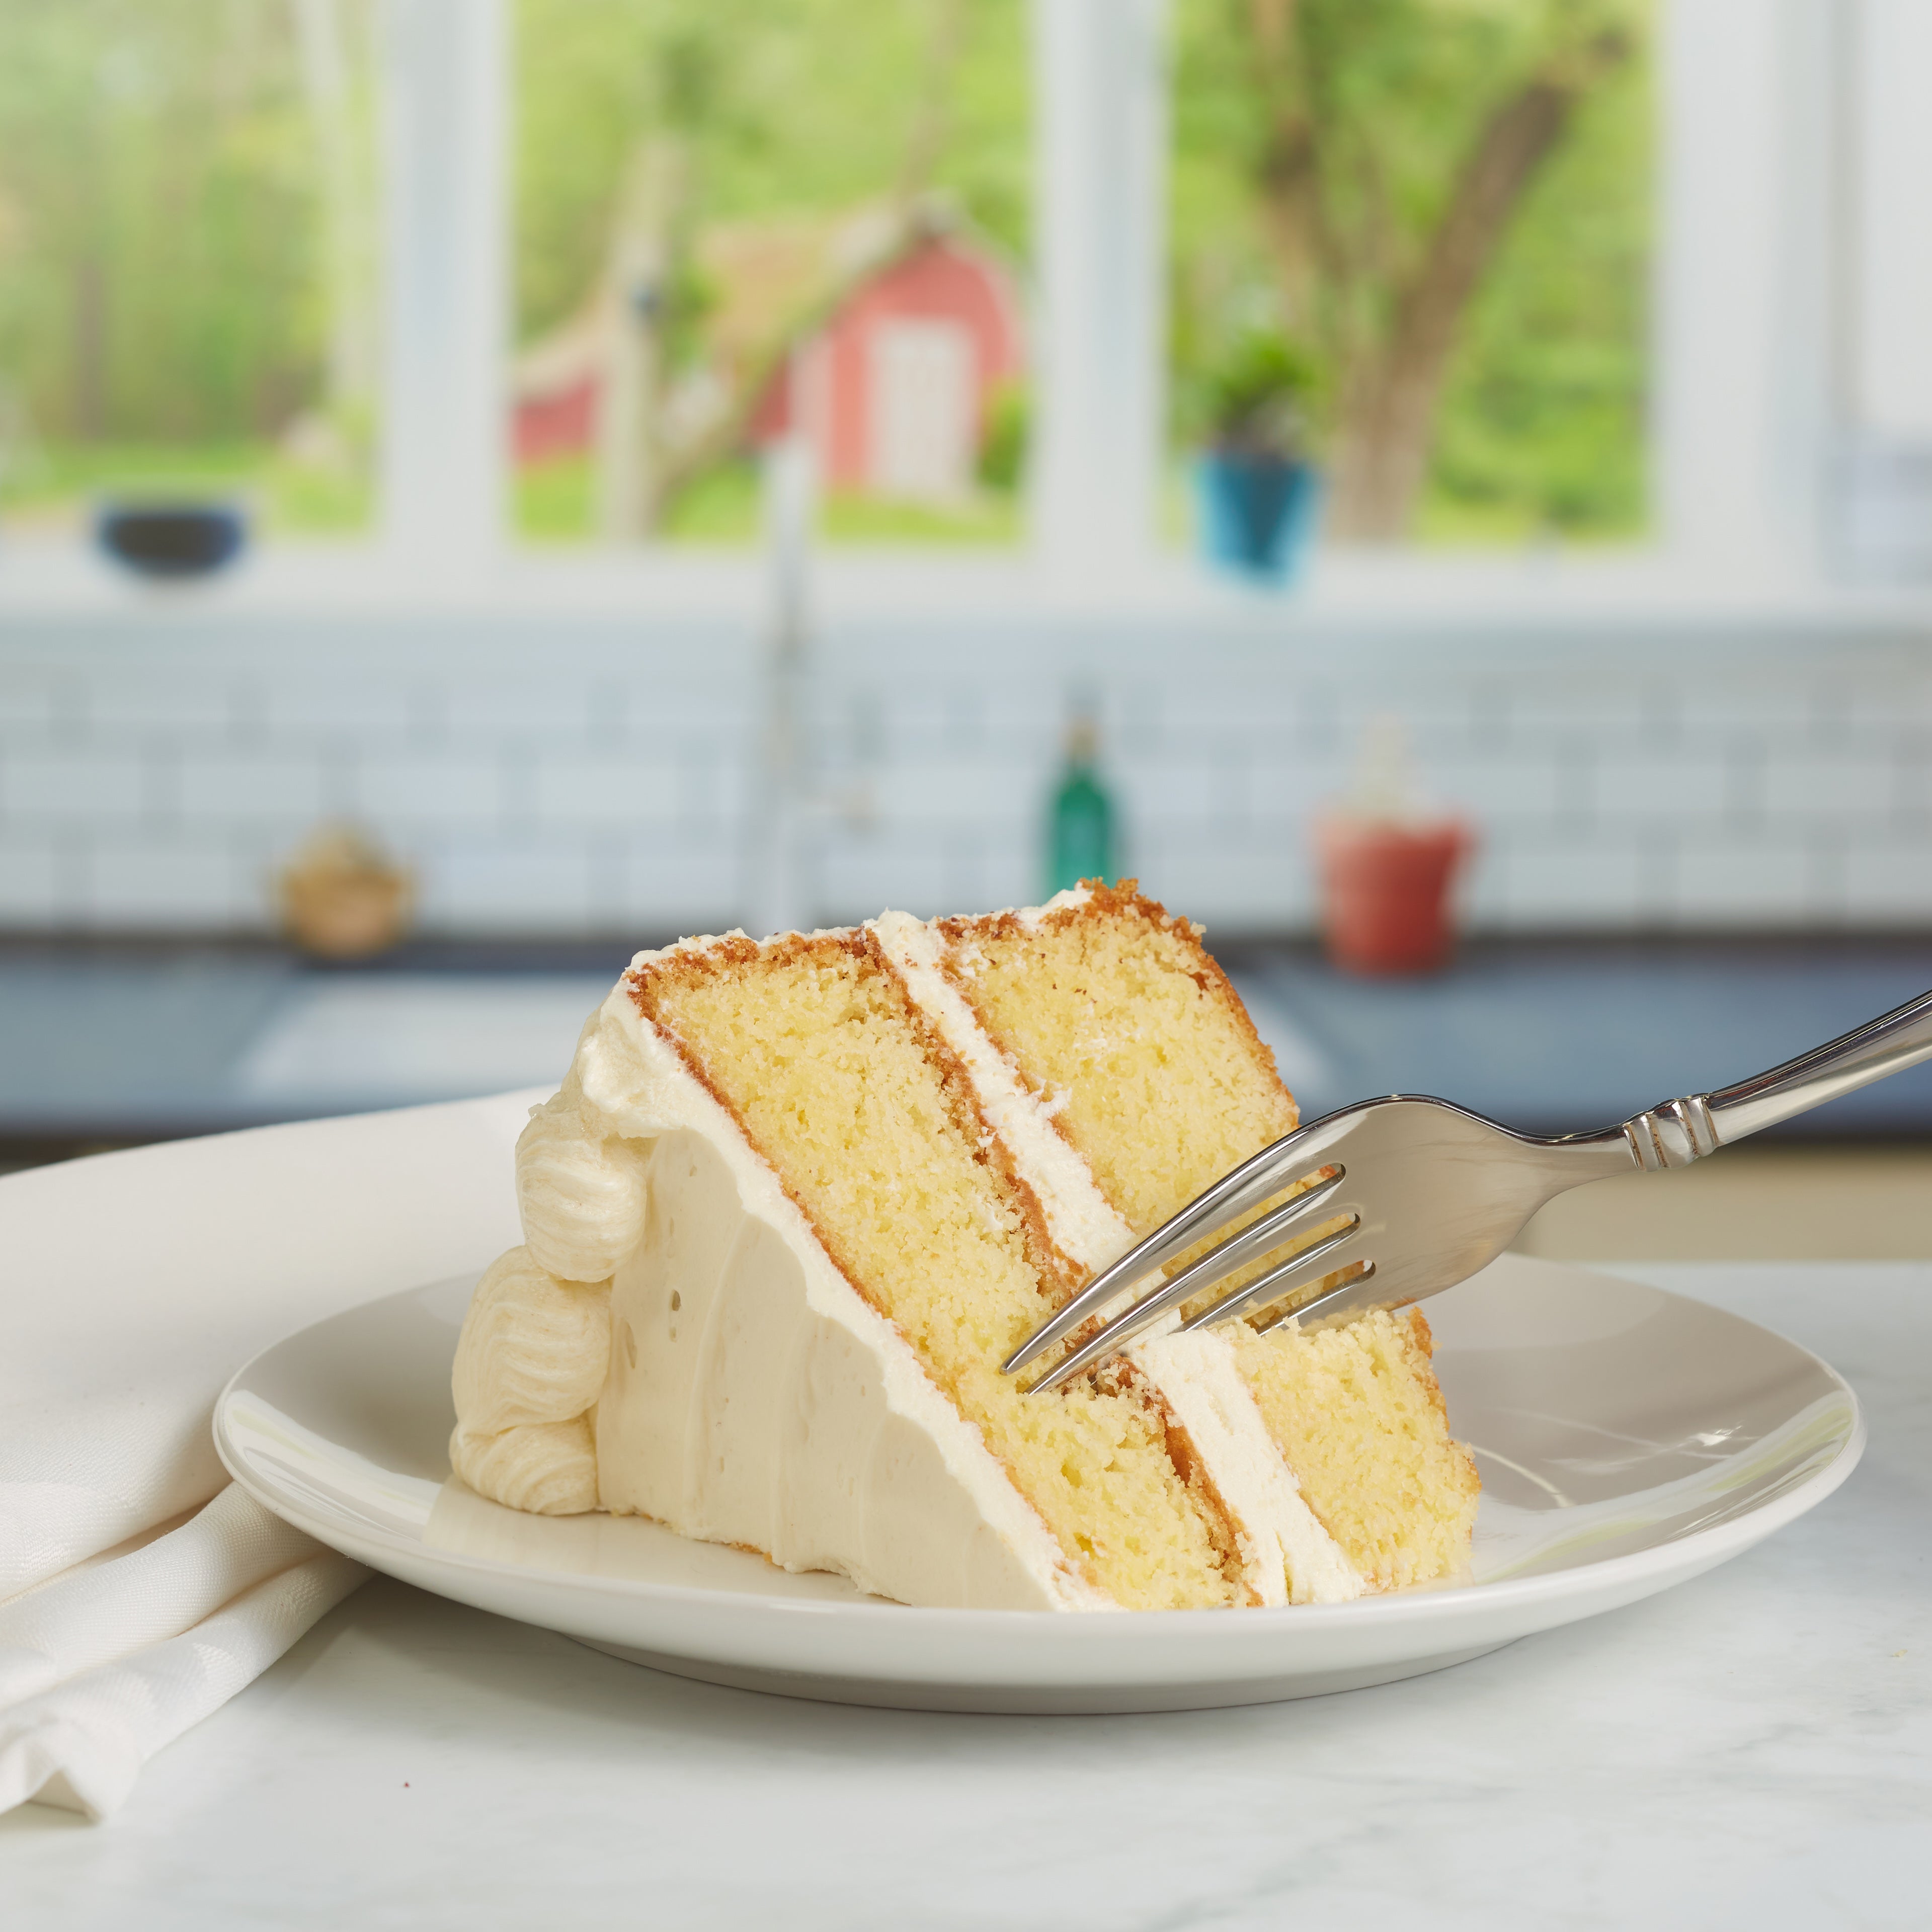 Image of a fork cutting into a slice of yellow cake with vanilla frosting